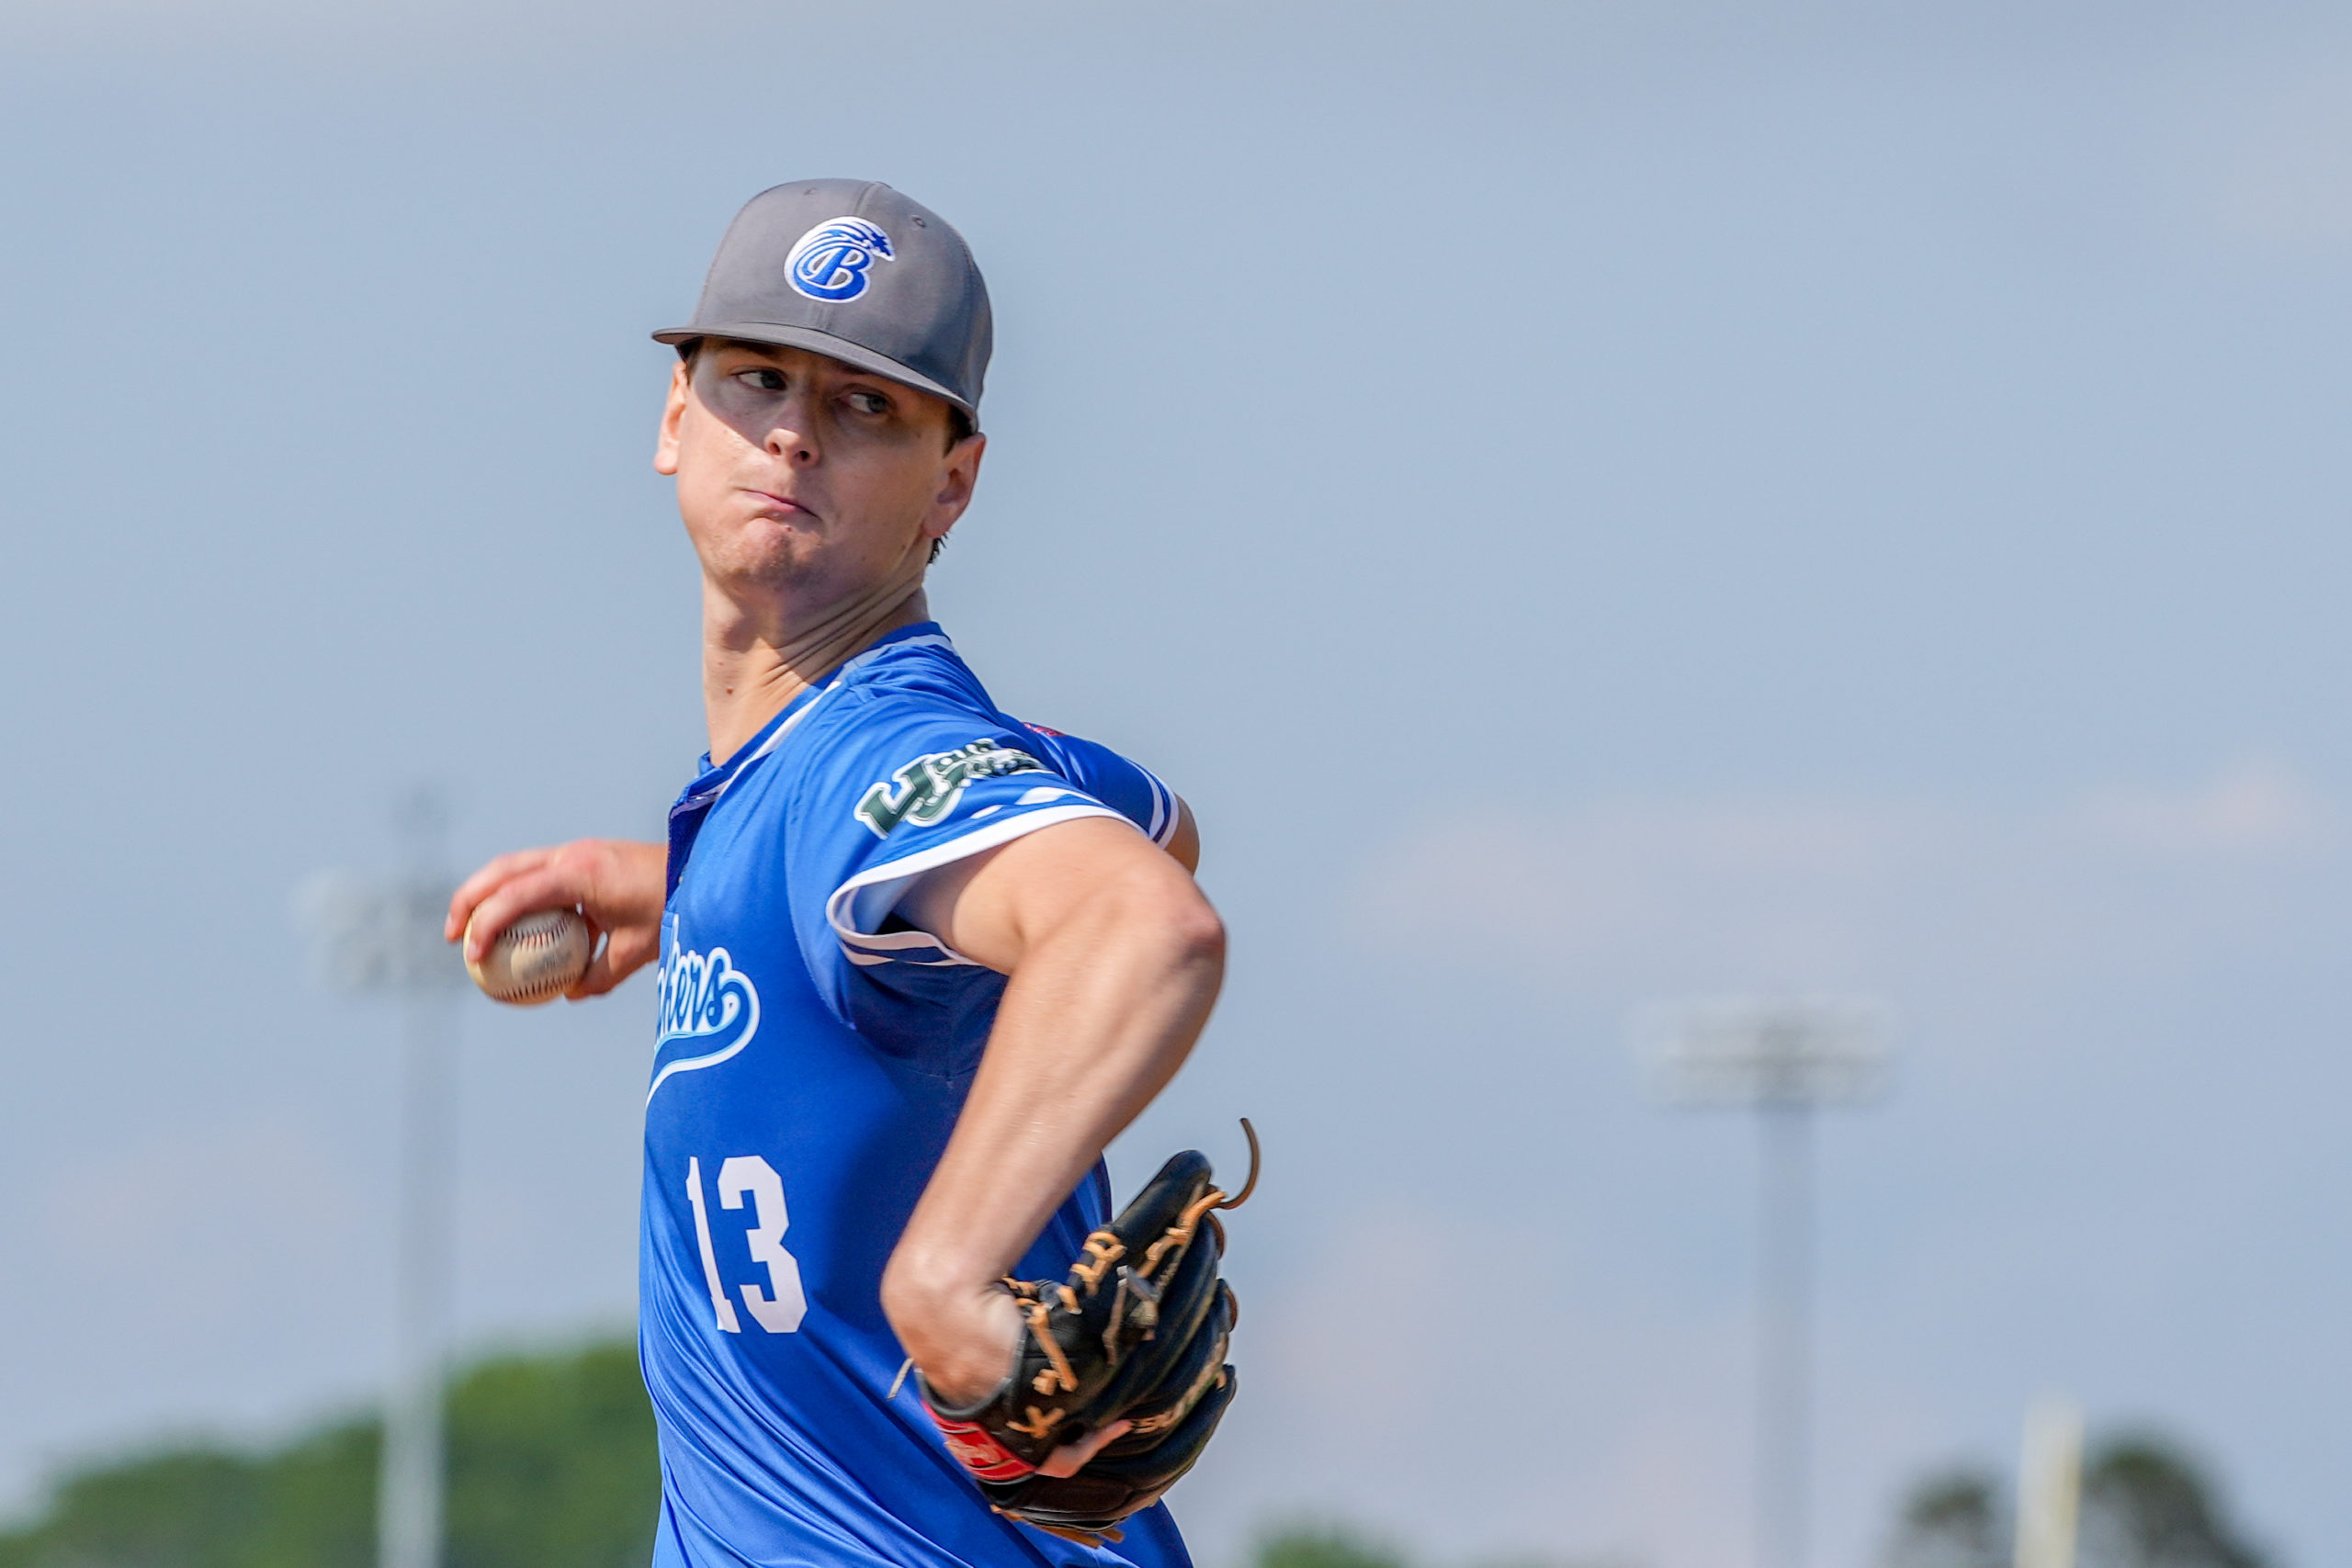 Bryan Krolikowski (Nassau CC) started the first game of the series on July 28 in Southampton and went eight innings, striking out seven while only allowing four hits and no walks.